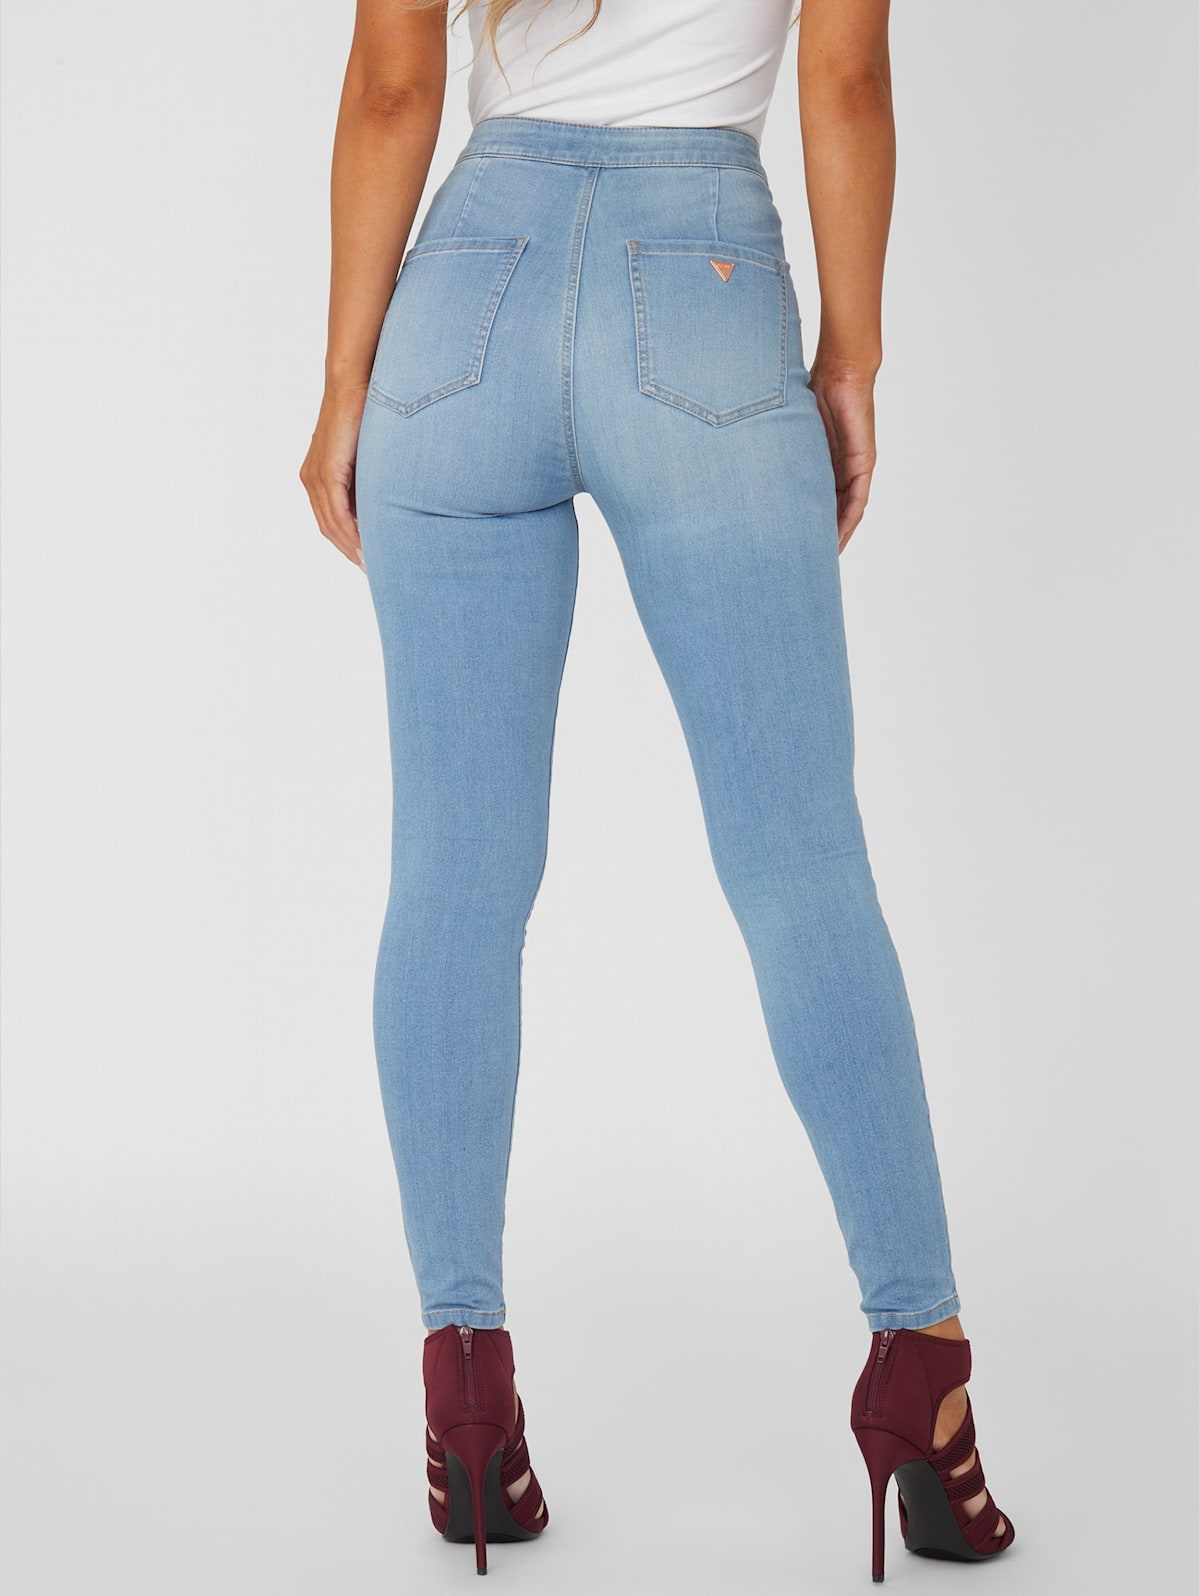 GUESS Womens Super High Rise Jean with Destroy Jeans